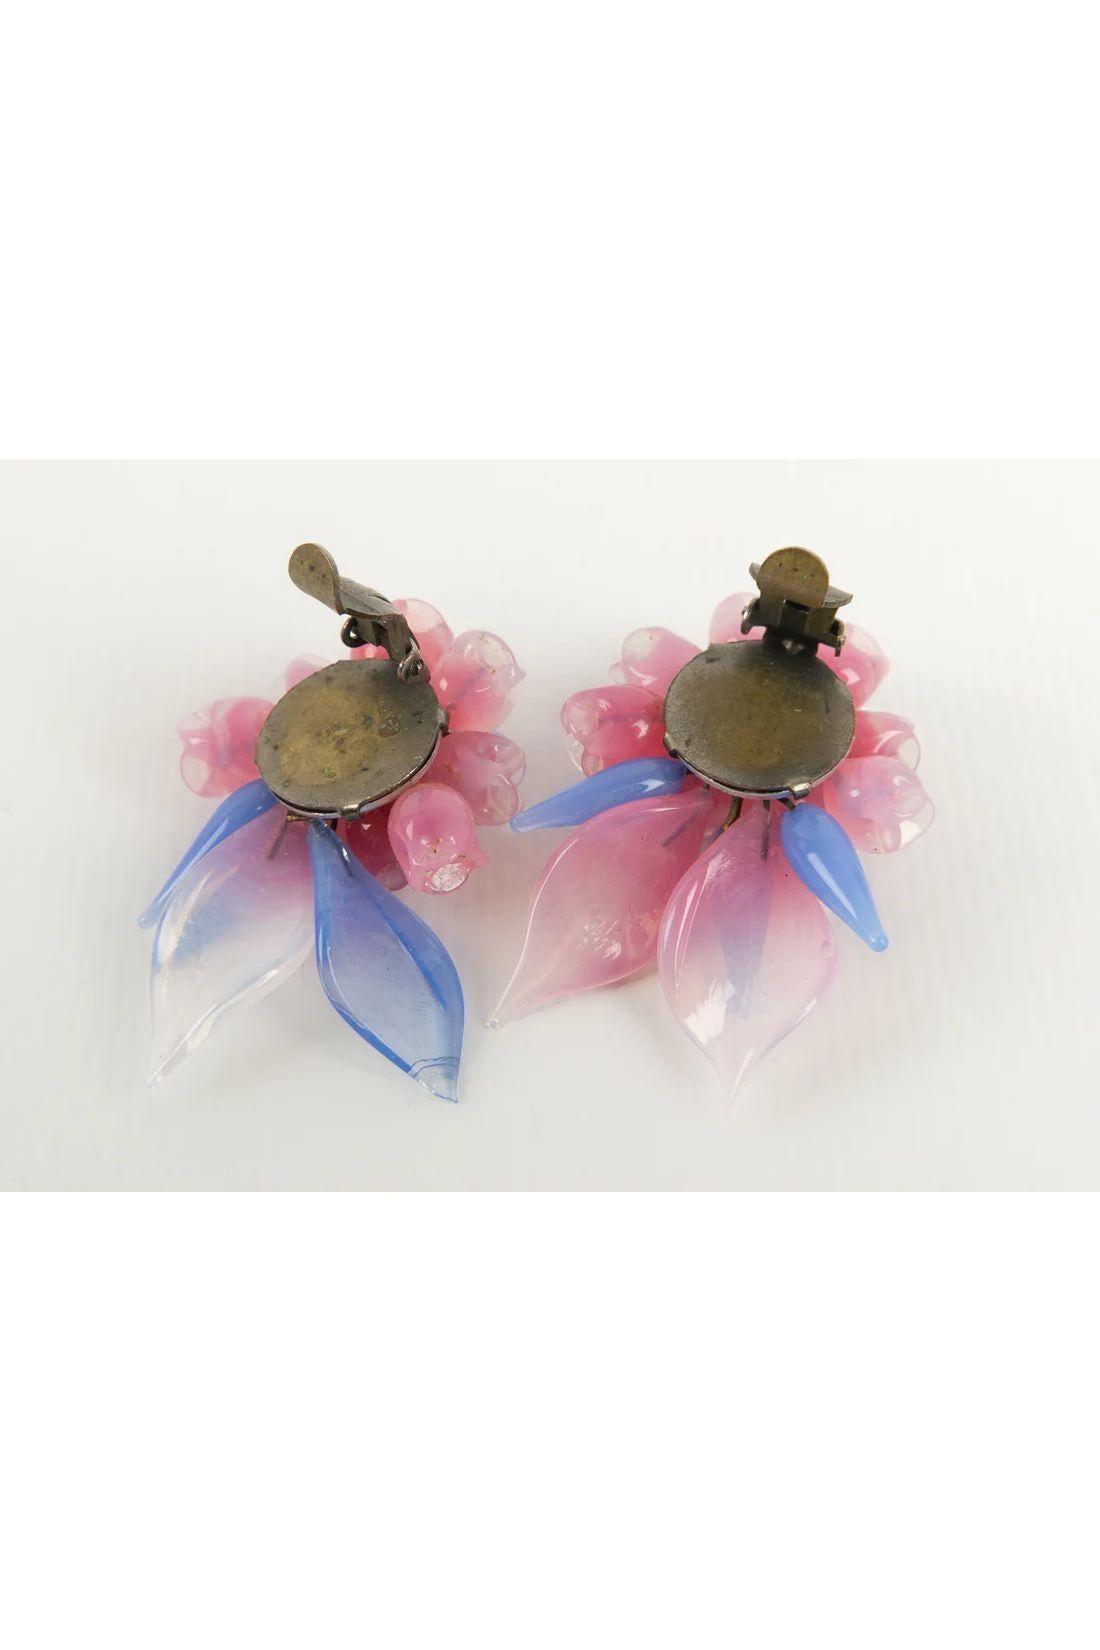 Maison Rousselet Earrings In Glass Paste in Shades of Blue and Pink In Good Condition For Sale In SAINT-OUEN-SUR-SEINE, FR